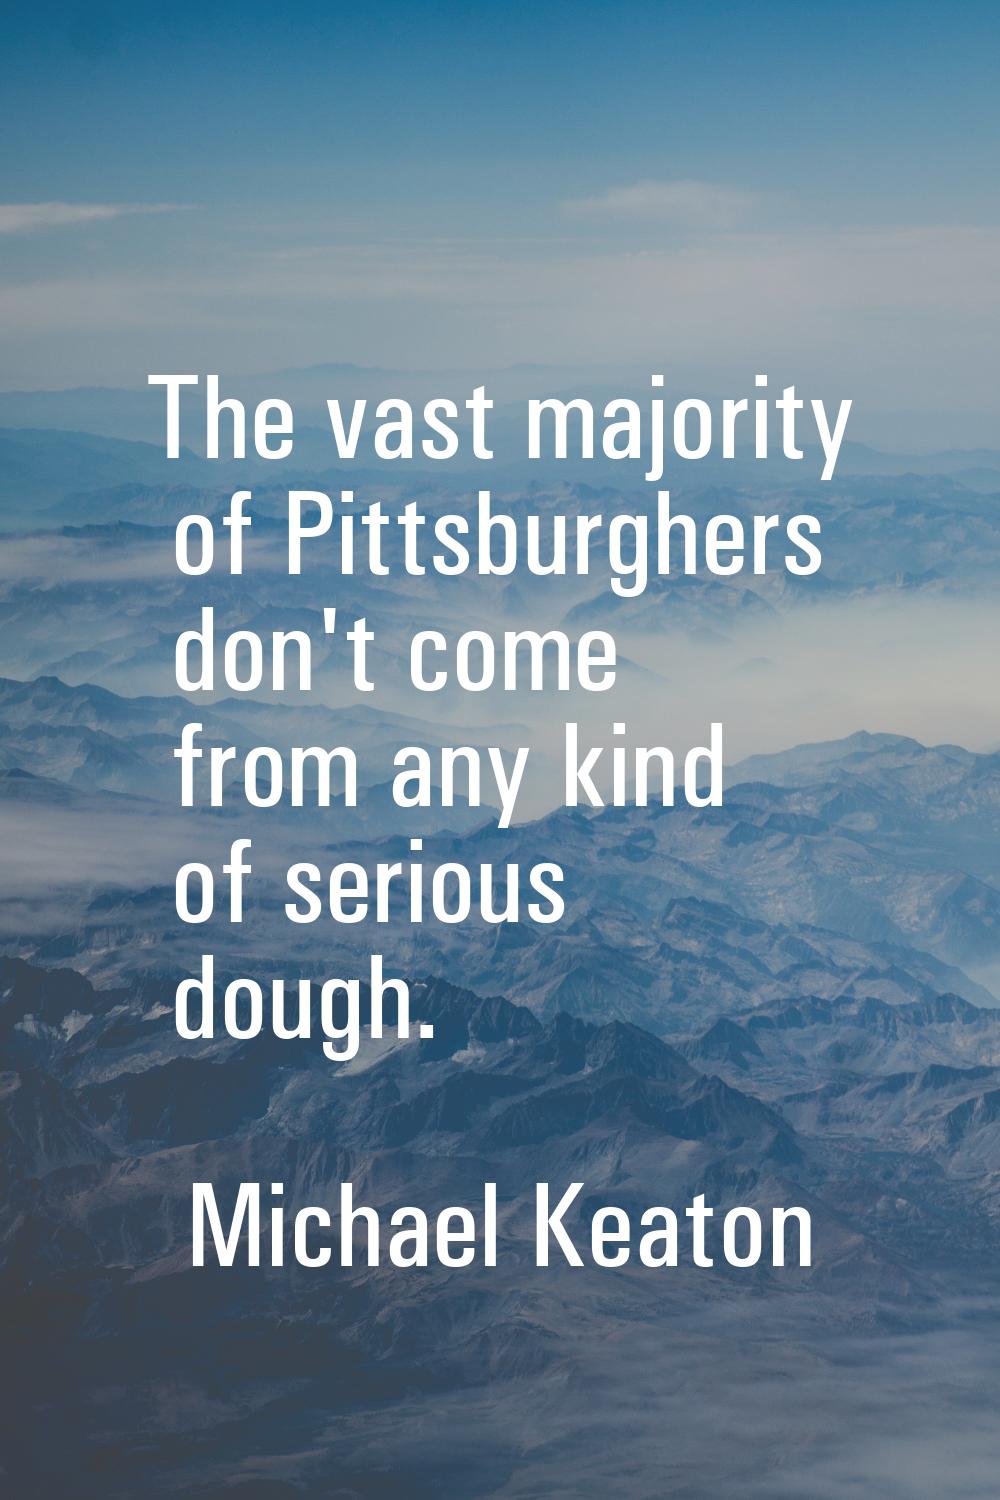 The vast majority of Pittsburghers don't come from any kind of serious dough.